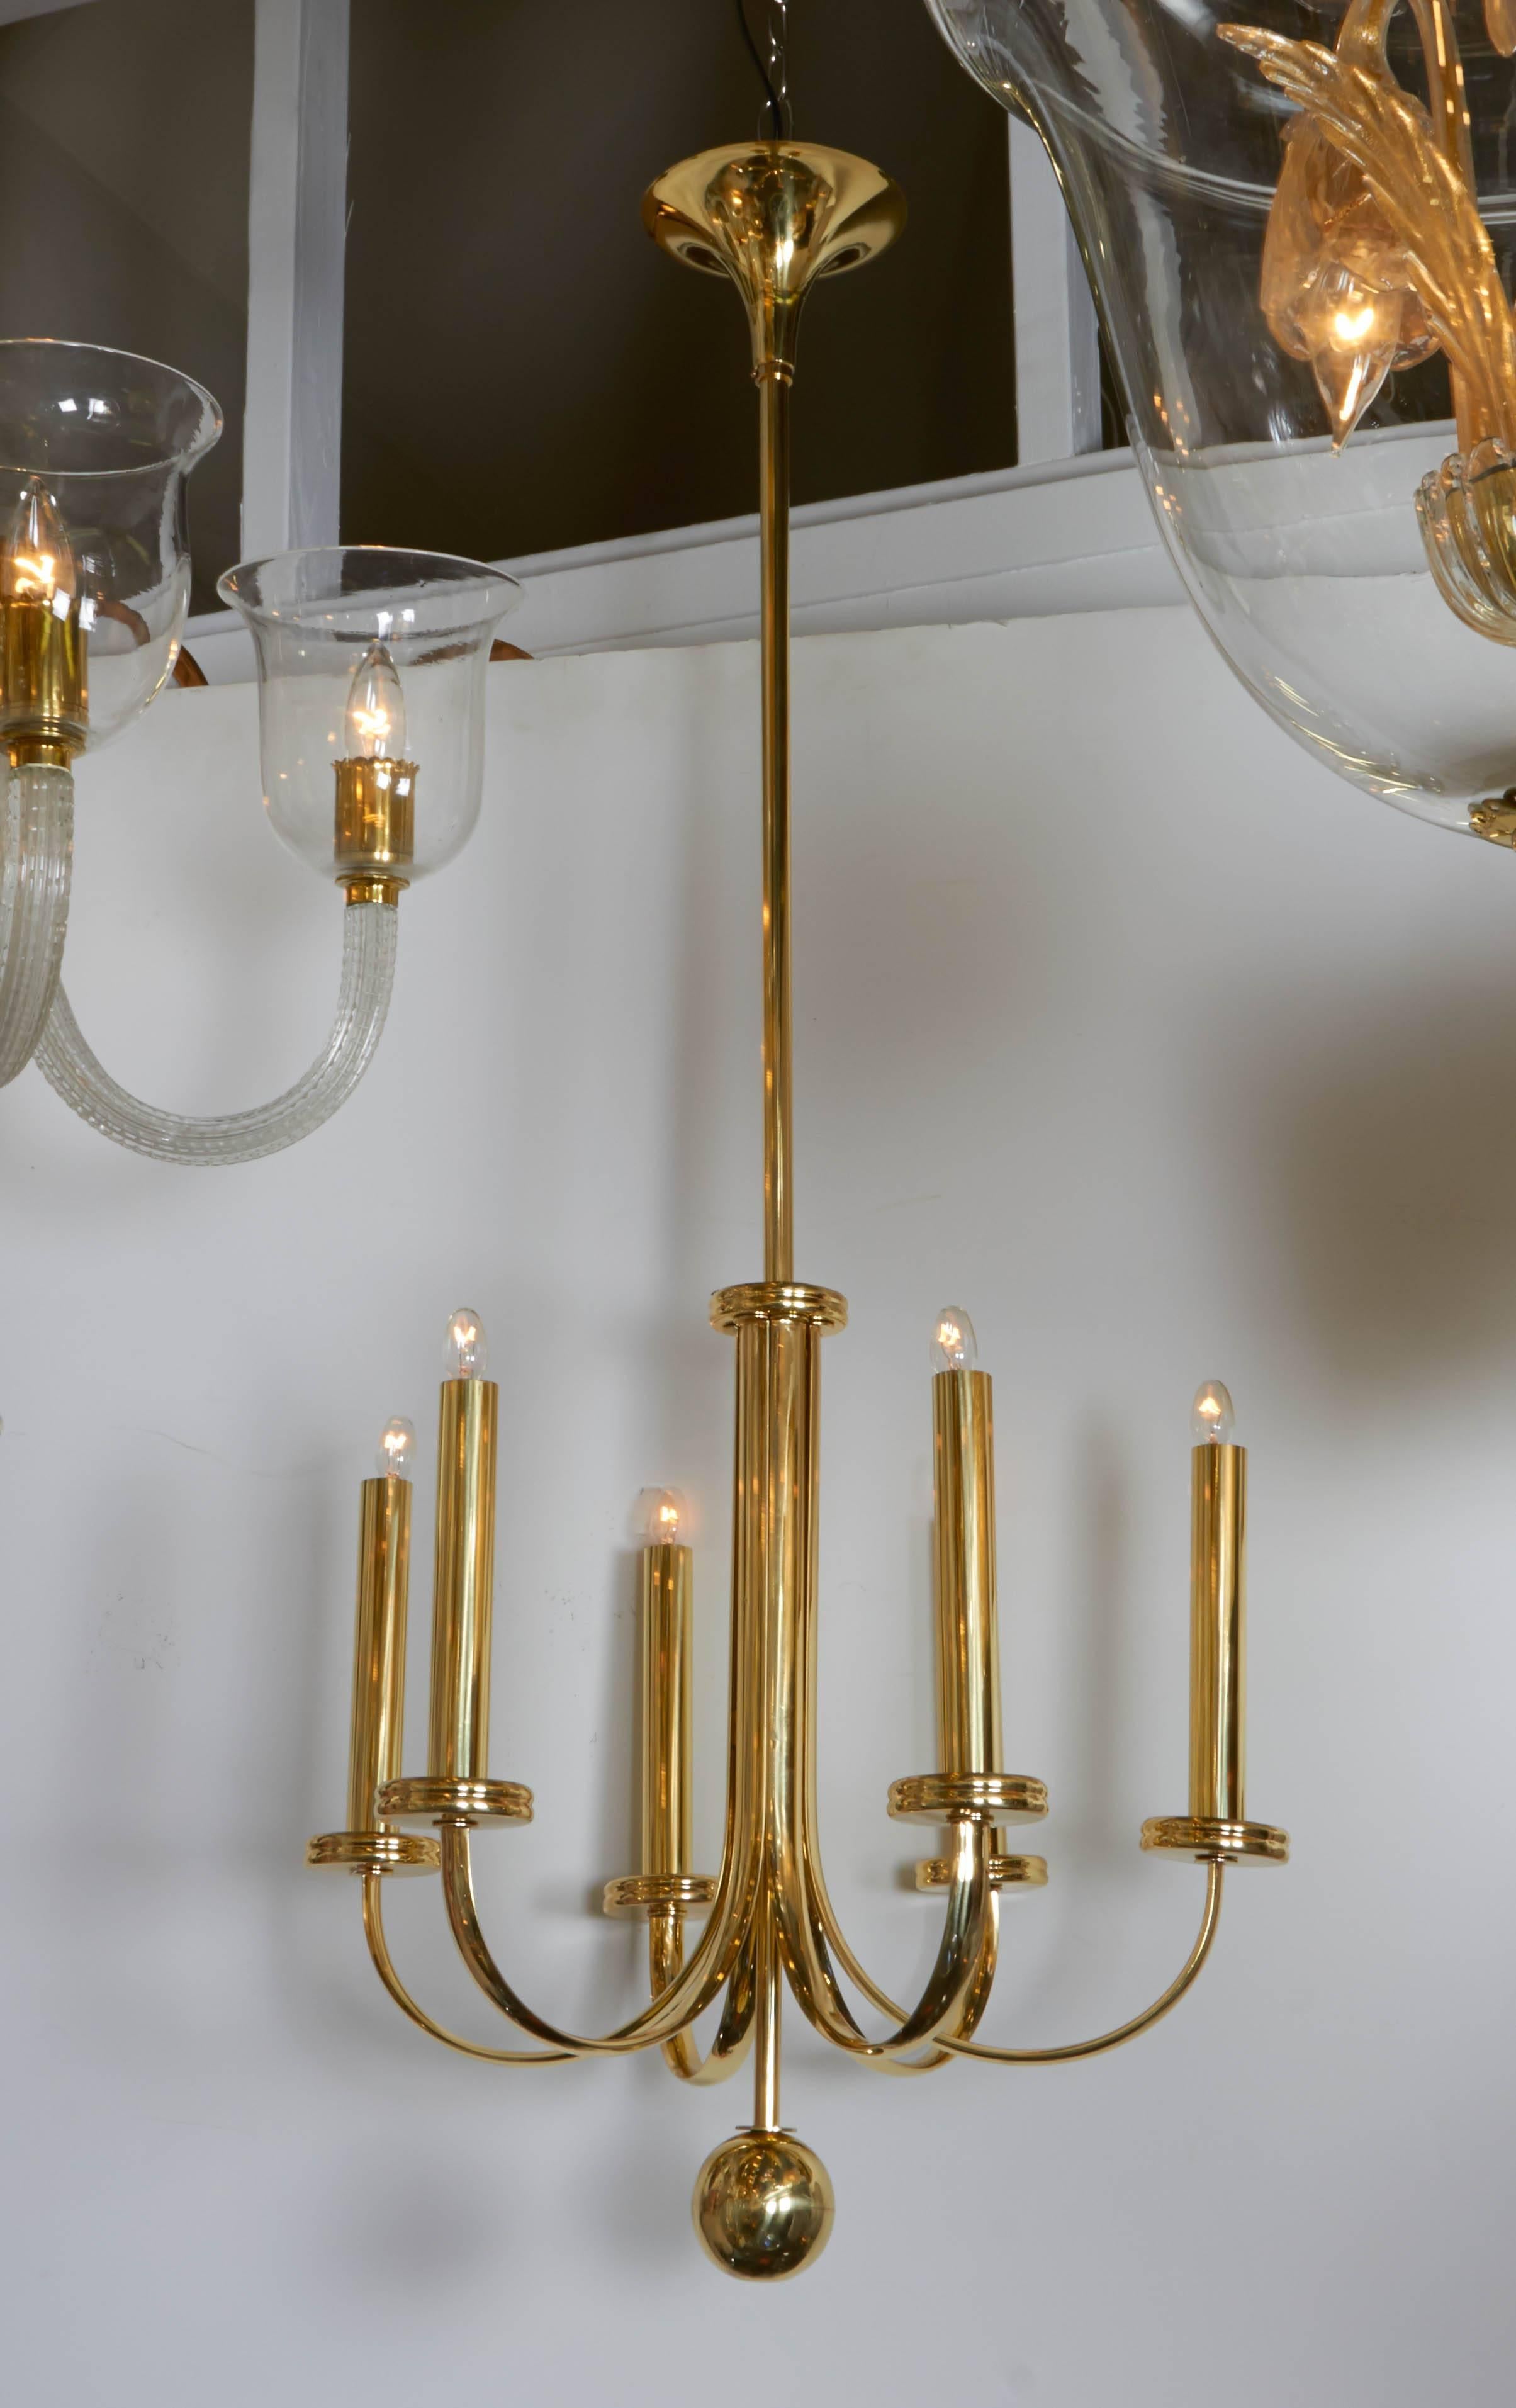 A wonderful example of Italian 1930s Art Deco and Fascist period lighting in an elegant and clean design. Six arms and all brass newly polished and lacquered. Rewired. Diameter of chandelier 20